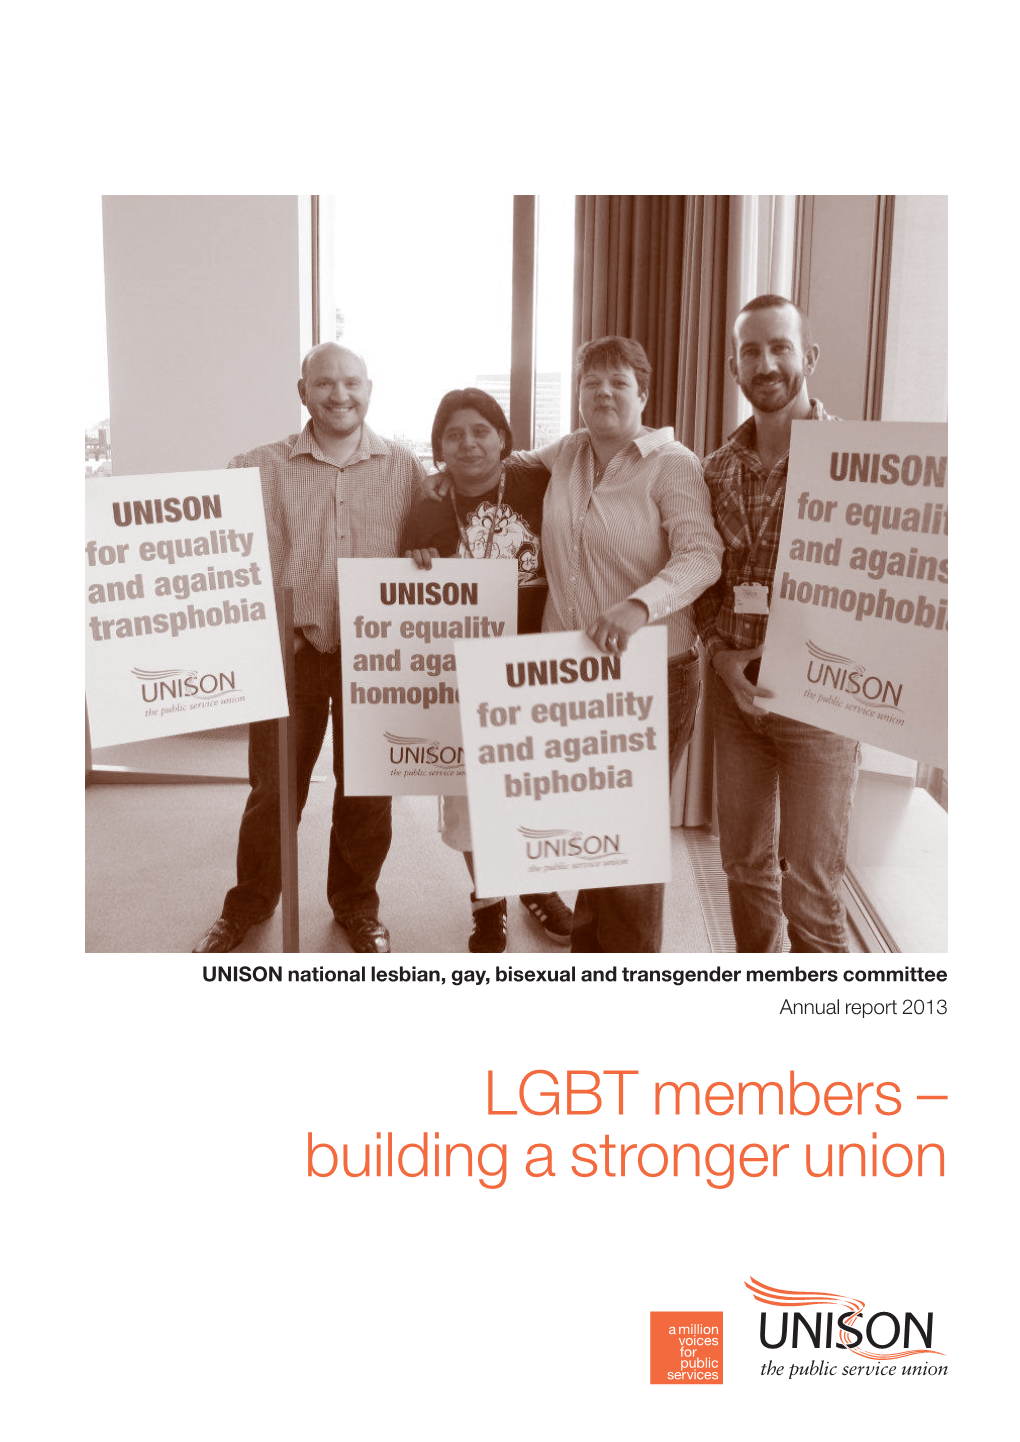 LGBT Members – Building a Stronger Union UNISON National Lesbian, Gay, Bisexual and Transgender Members Committee Annual Report 2013